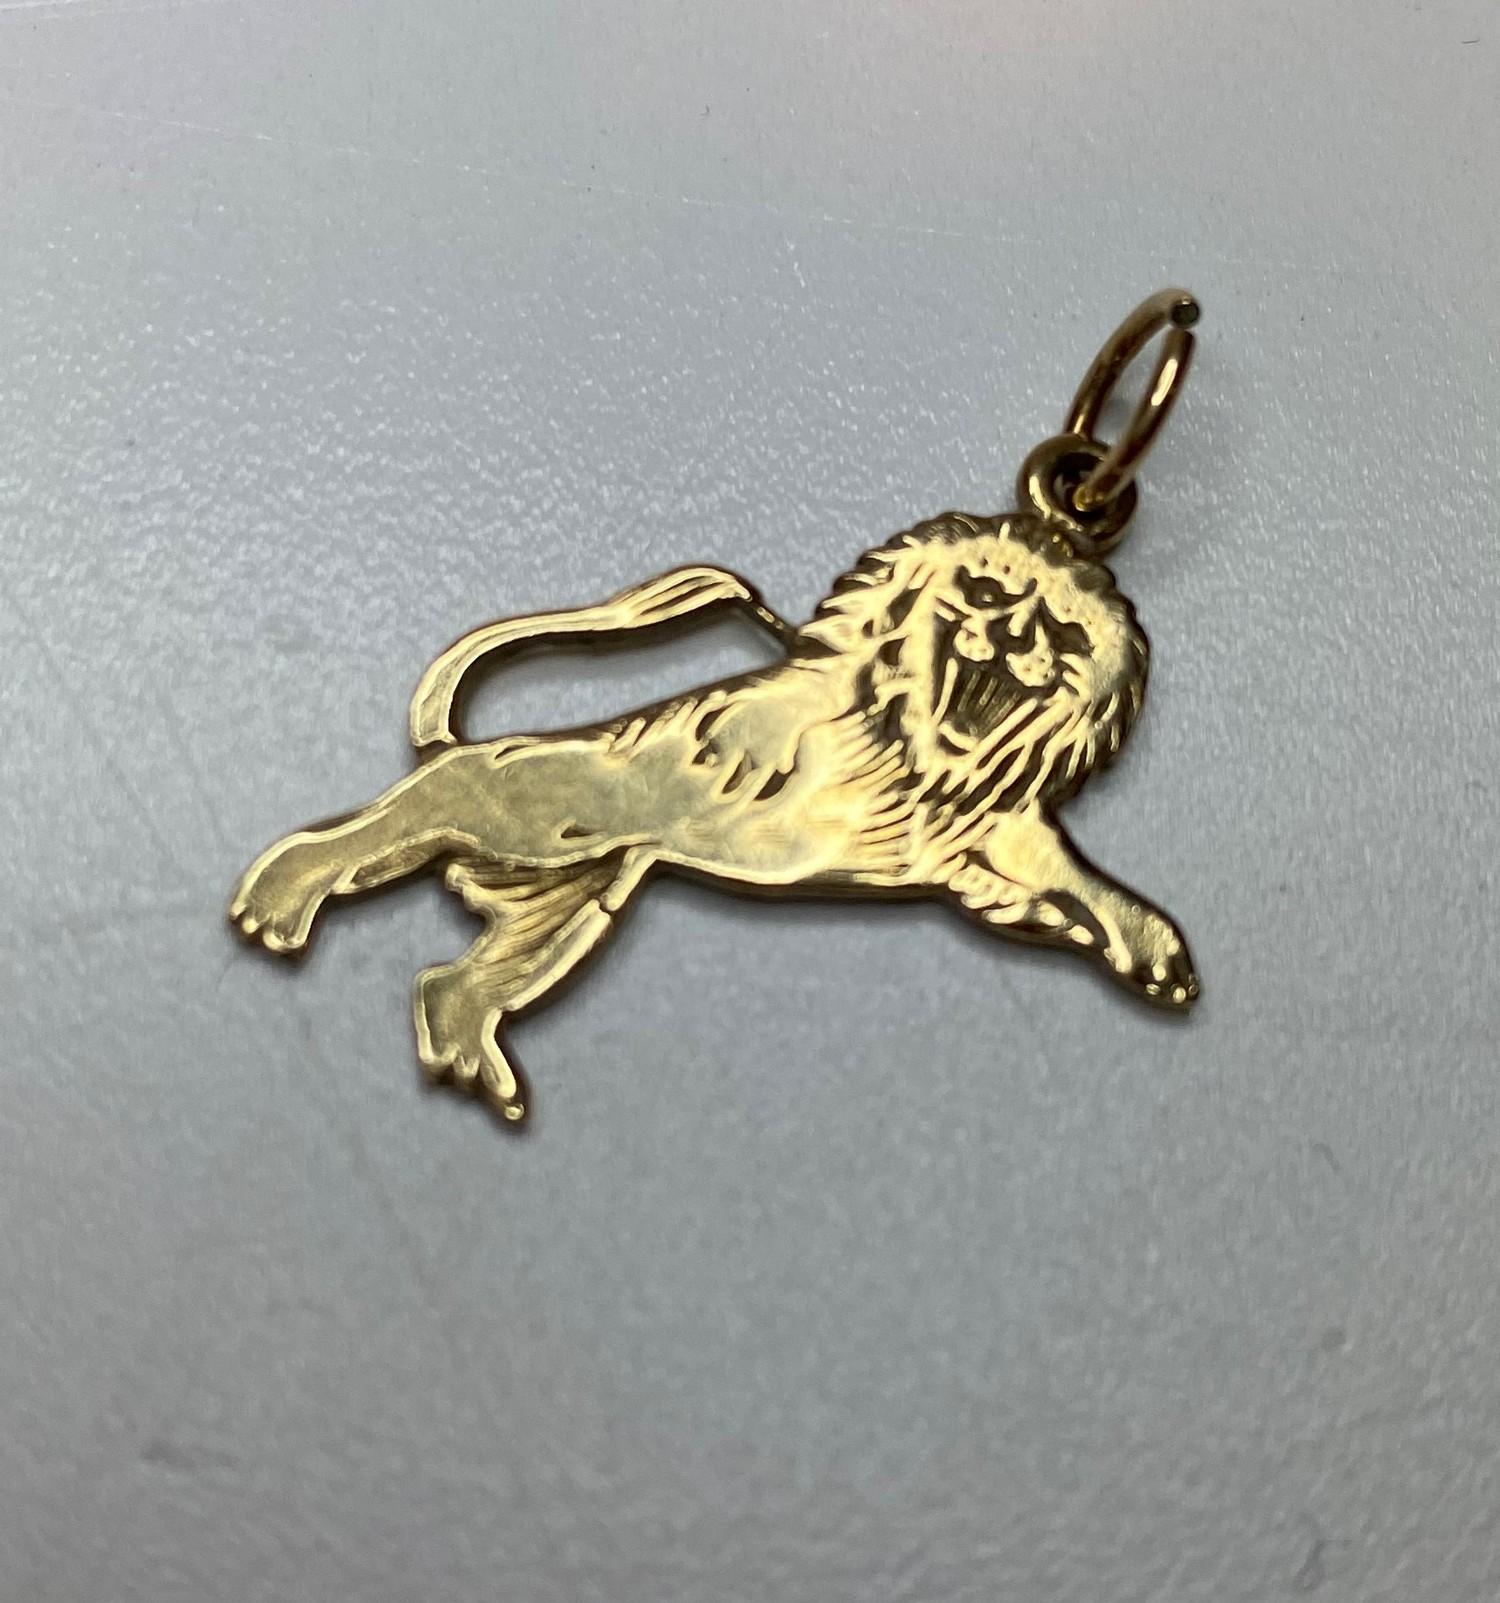 9CT Gold Lion Charm/Pendant, weight 2g approx - Image 2 of 3